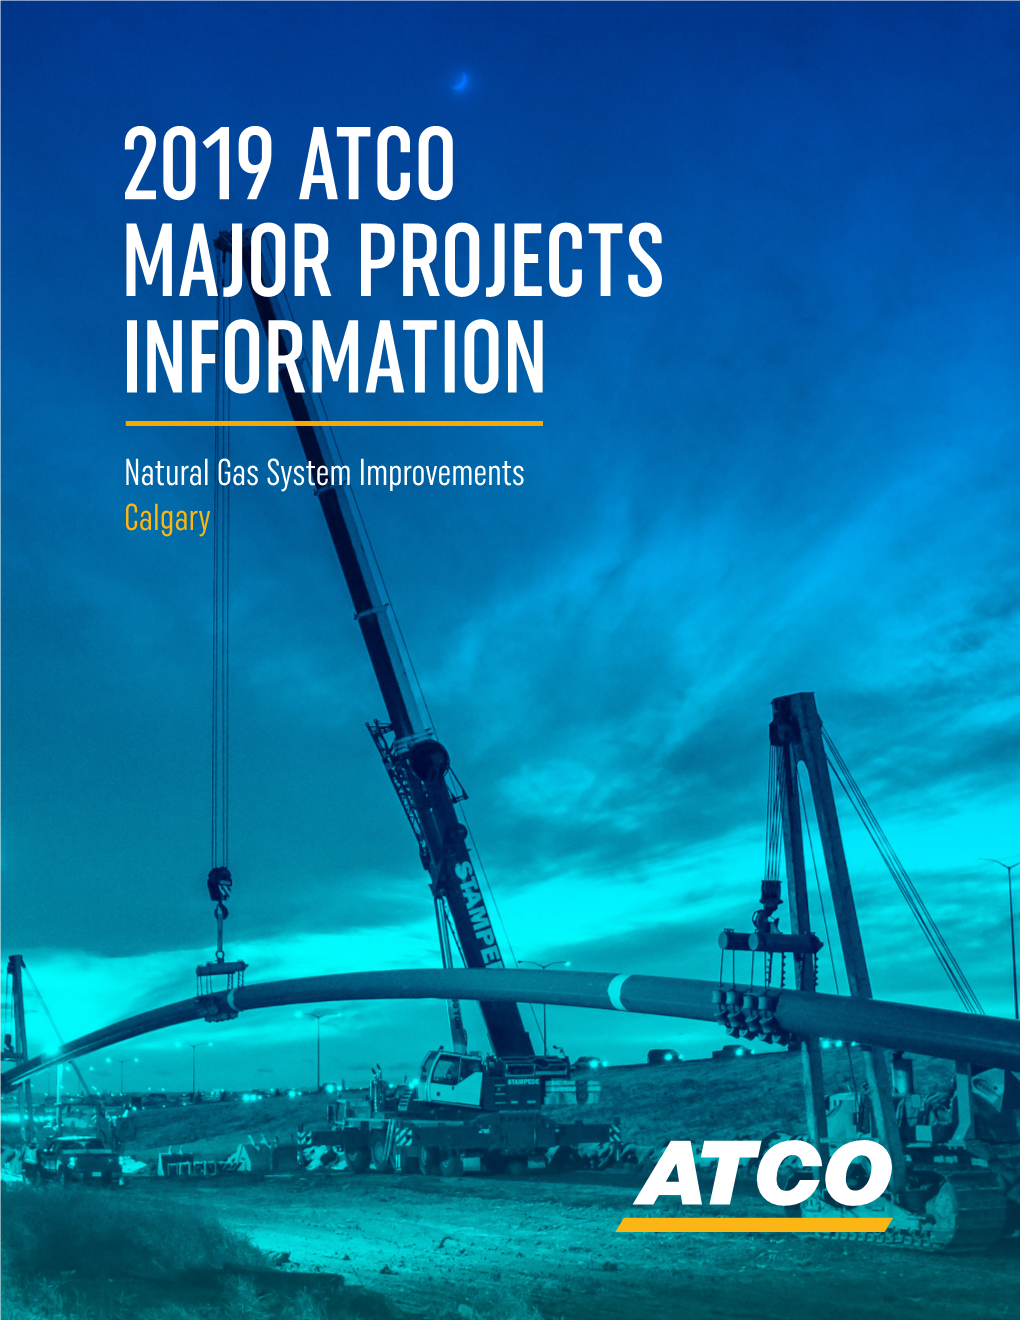 2019 Atco Major Projects Information